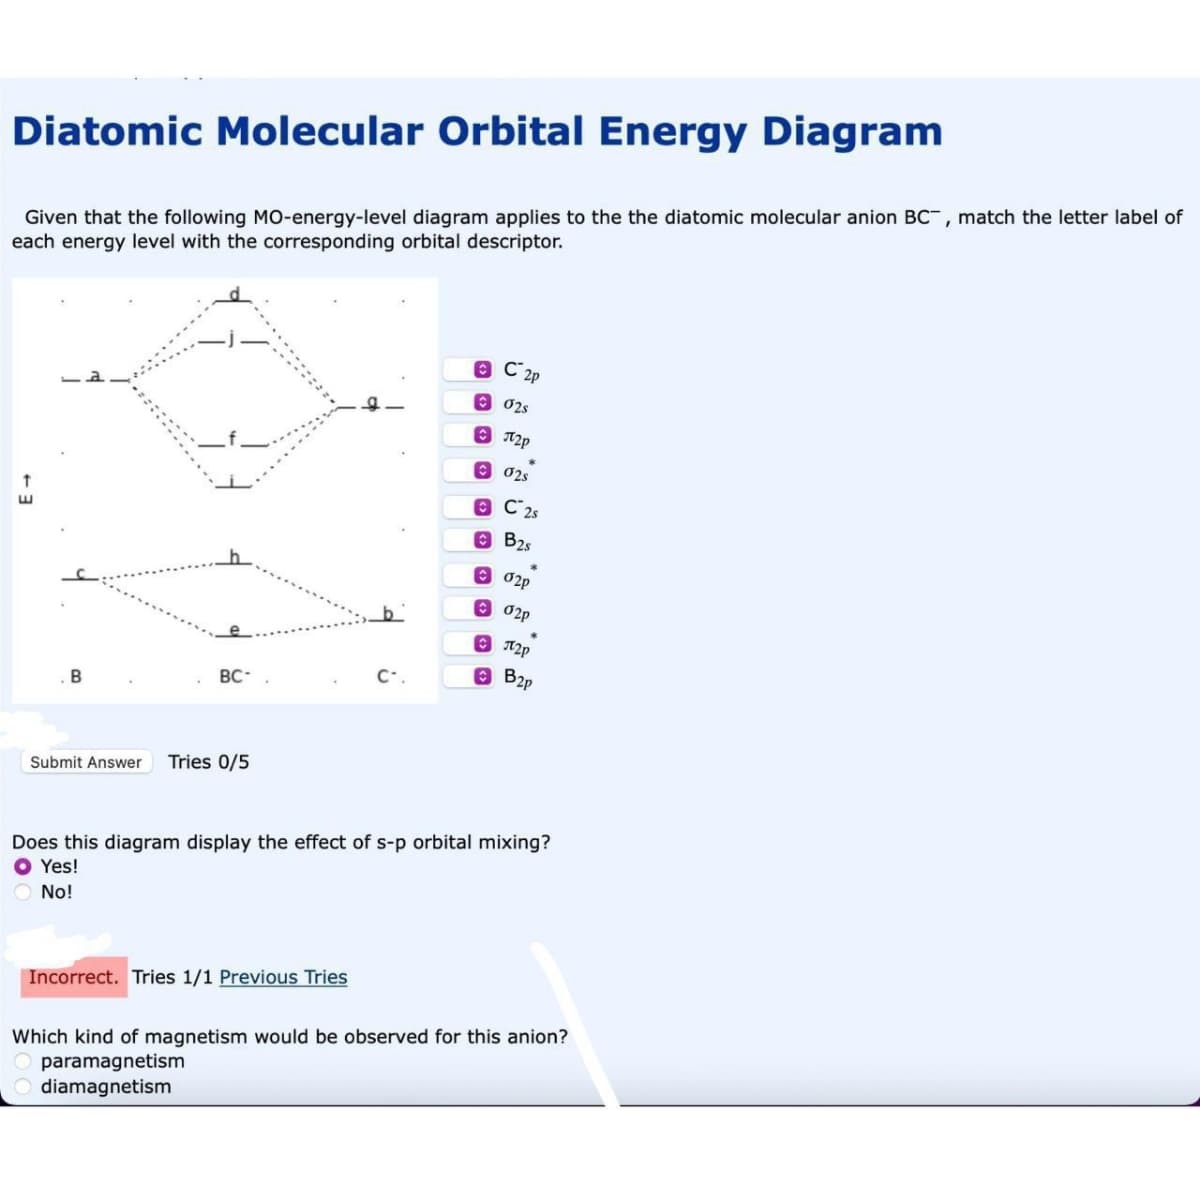 Diatomic Molecular Orbital Energy Diagram
Given that the following MO-energy-level diagram applies to the the diatomic molecular anion BC, match the letter label of
each energy level with the corresponding orbital descriptor.
B
BC-
Submit Answer Tries 0/5
C2p
02s
Incorrect. Tries 1/1 Previous Tries
П2р
02s
ⒸC 2s
B2s
02p
02p
е П2р
B2p
Does this diagram display the effect of s-p orbital mixing?
O Yes!
No!
Which kind of magnetism would be observed for this anion?
paramagnetism
diamagnetism